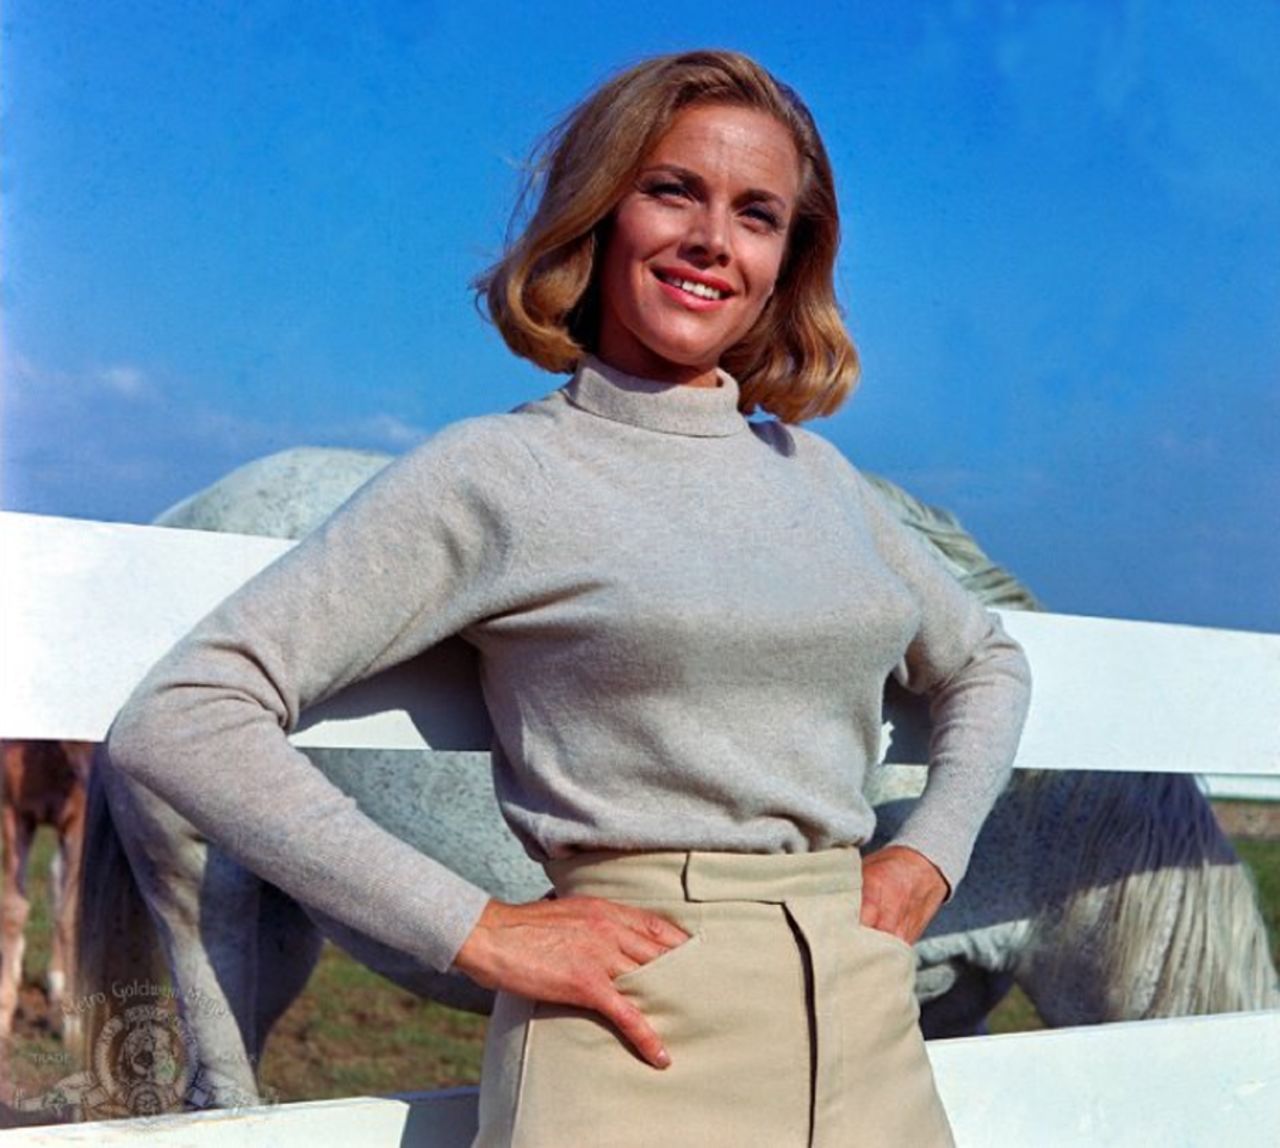 Pilot Pussy Galore, played by Honor Blackman, claimed to be immune to Bond's charm in 1964's "Goldfinger." However, Galore eventually falls for 007.